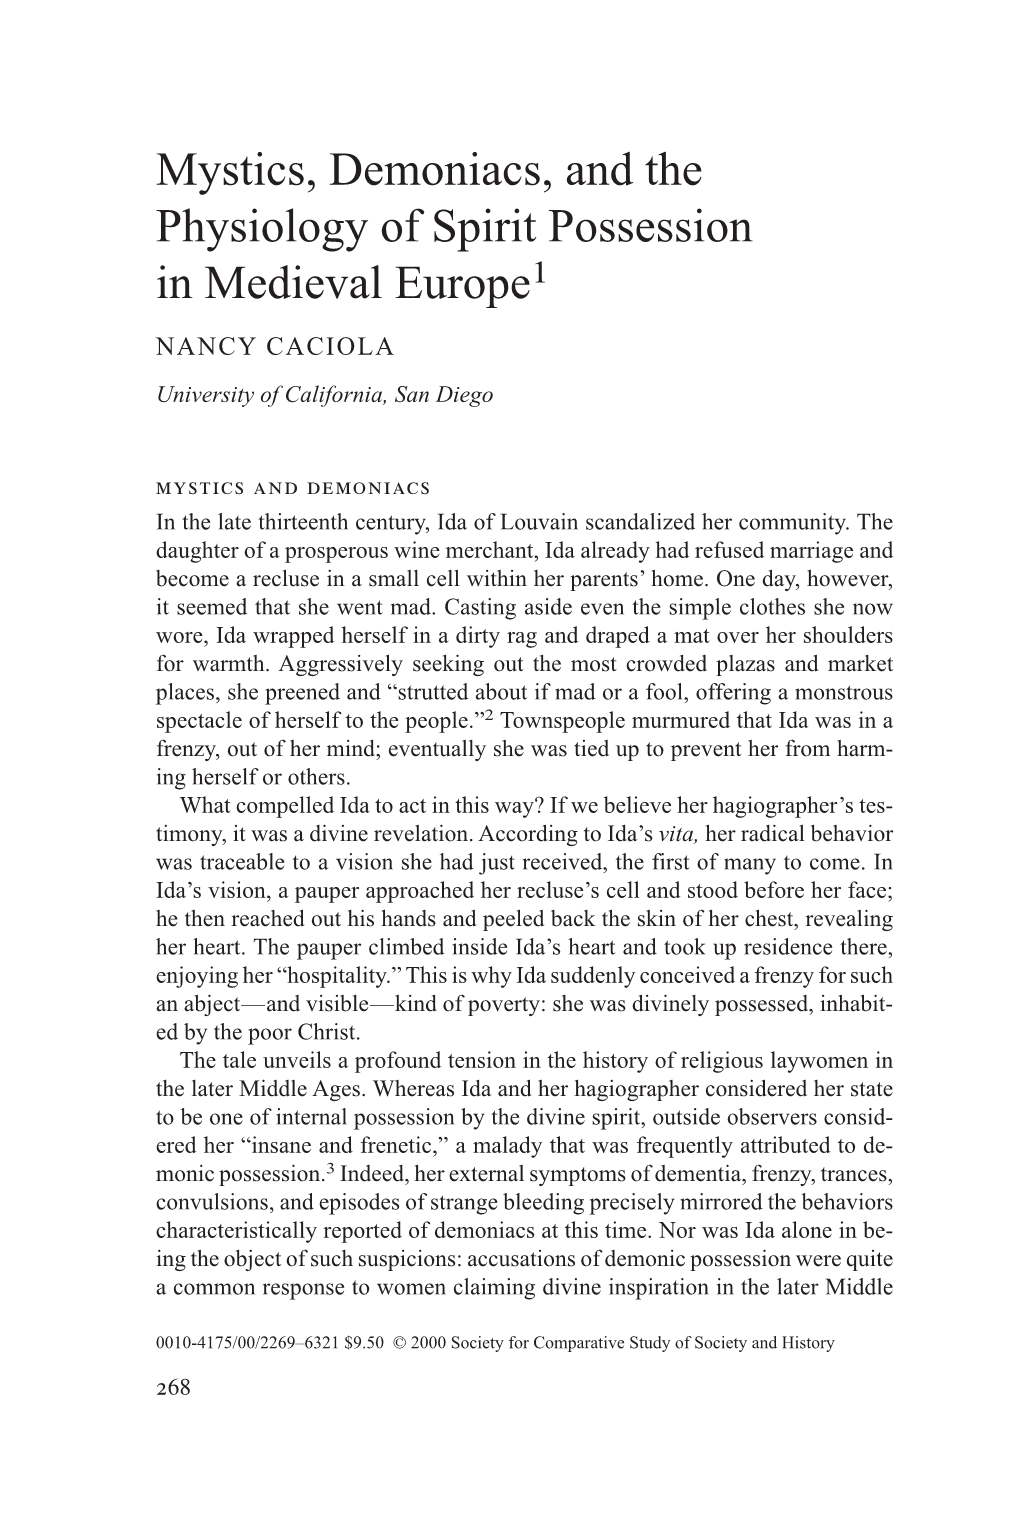 Mystics, Demoniacs, and the Physiology of Spirit Possession in Medieval Europe1